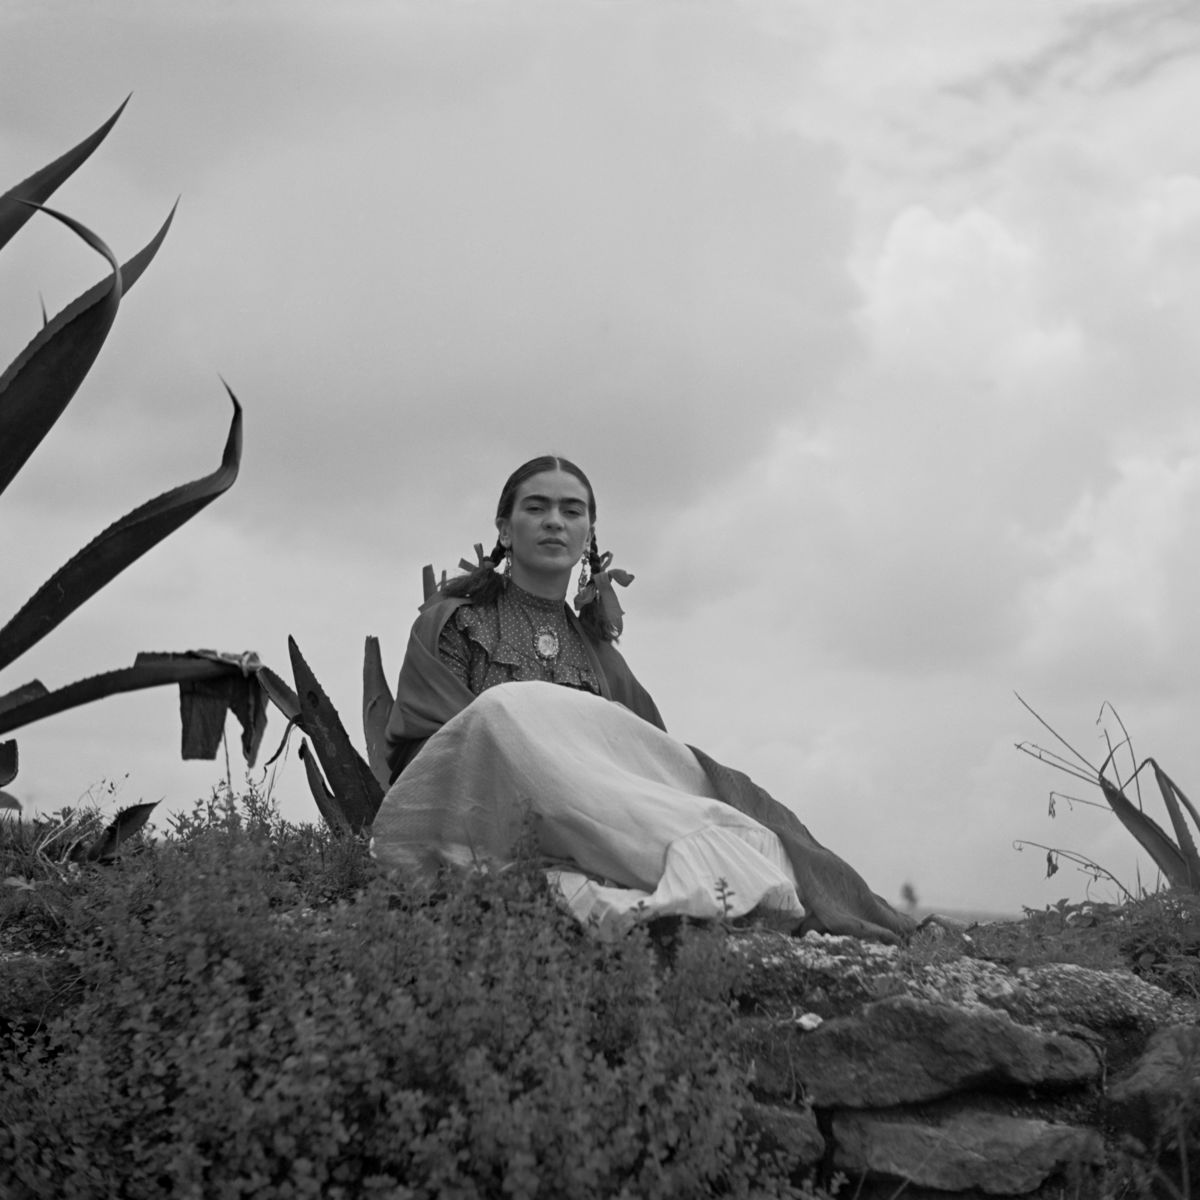 Frida Kahlo Seated Next to an Agave Plant by Toni Frissell - 1937